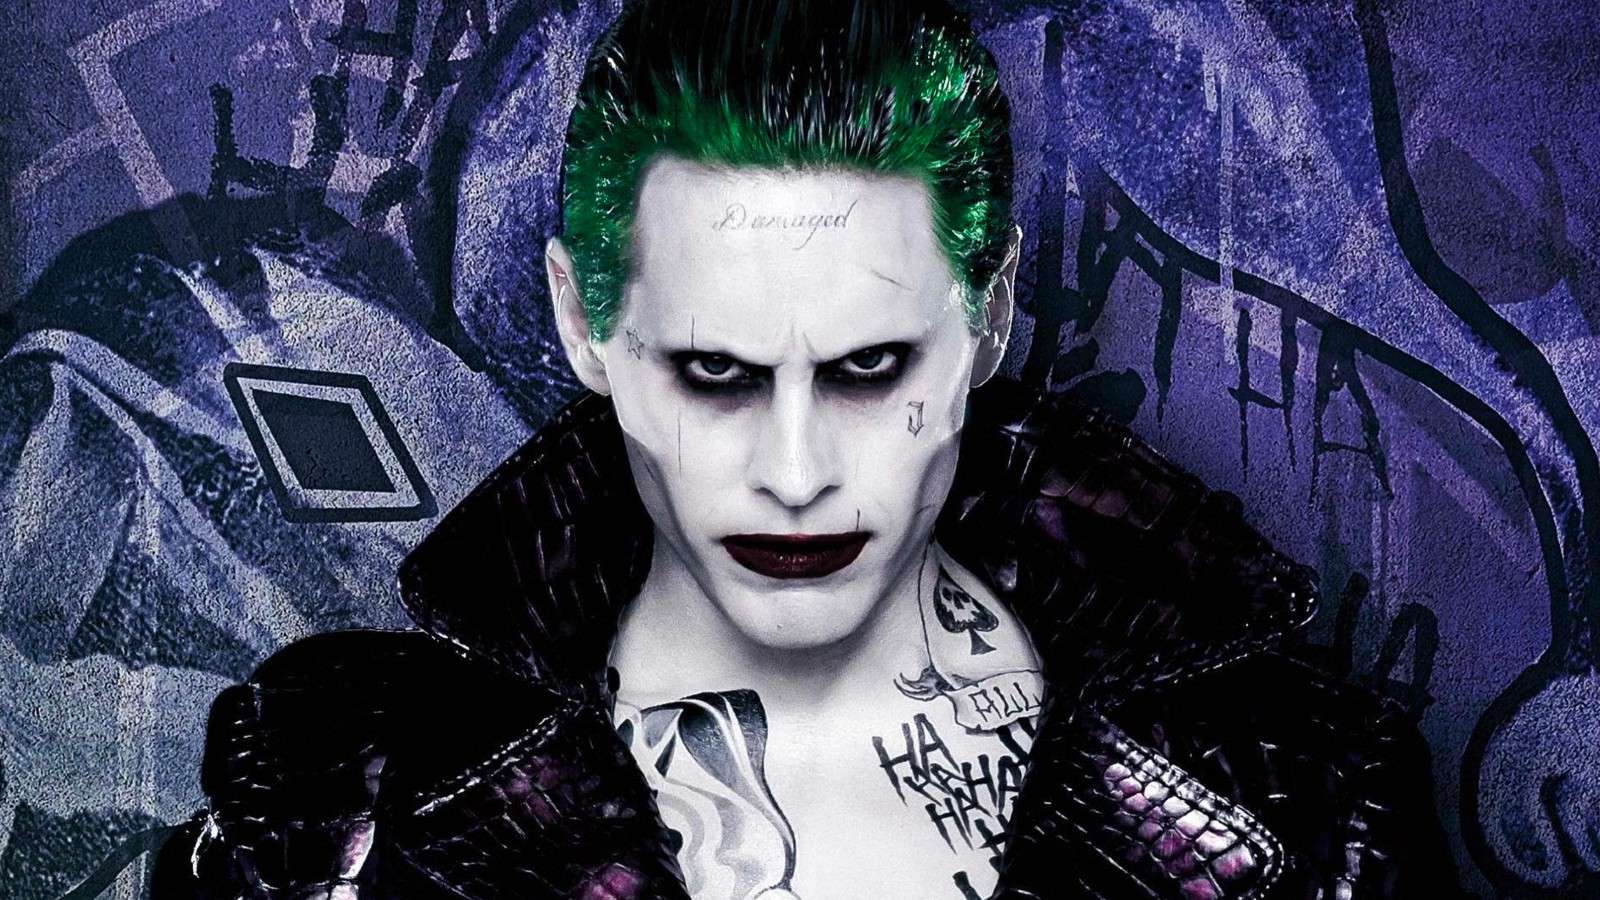 Jared Leto as the Joker on the 2016 Suicide Squad poster